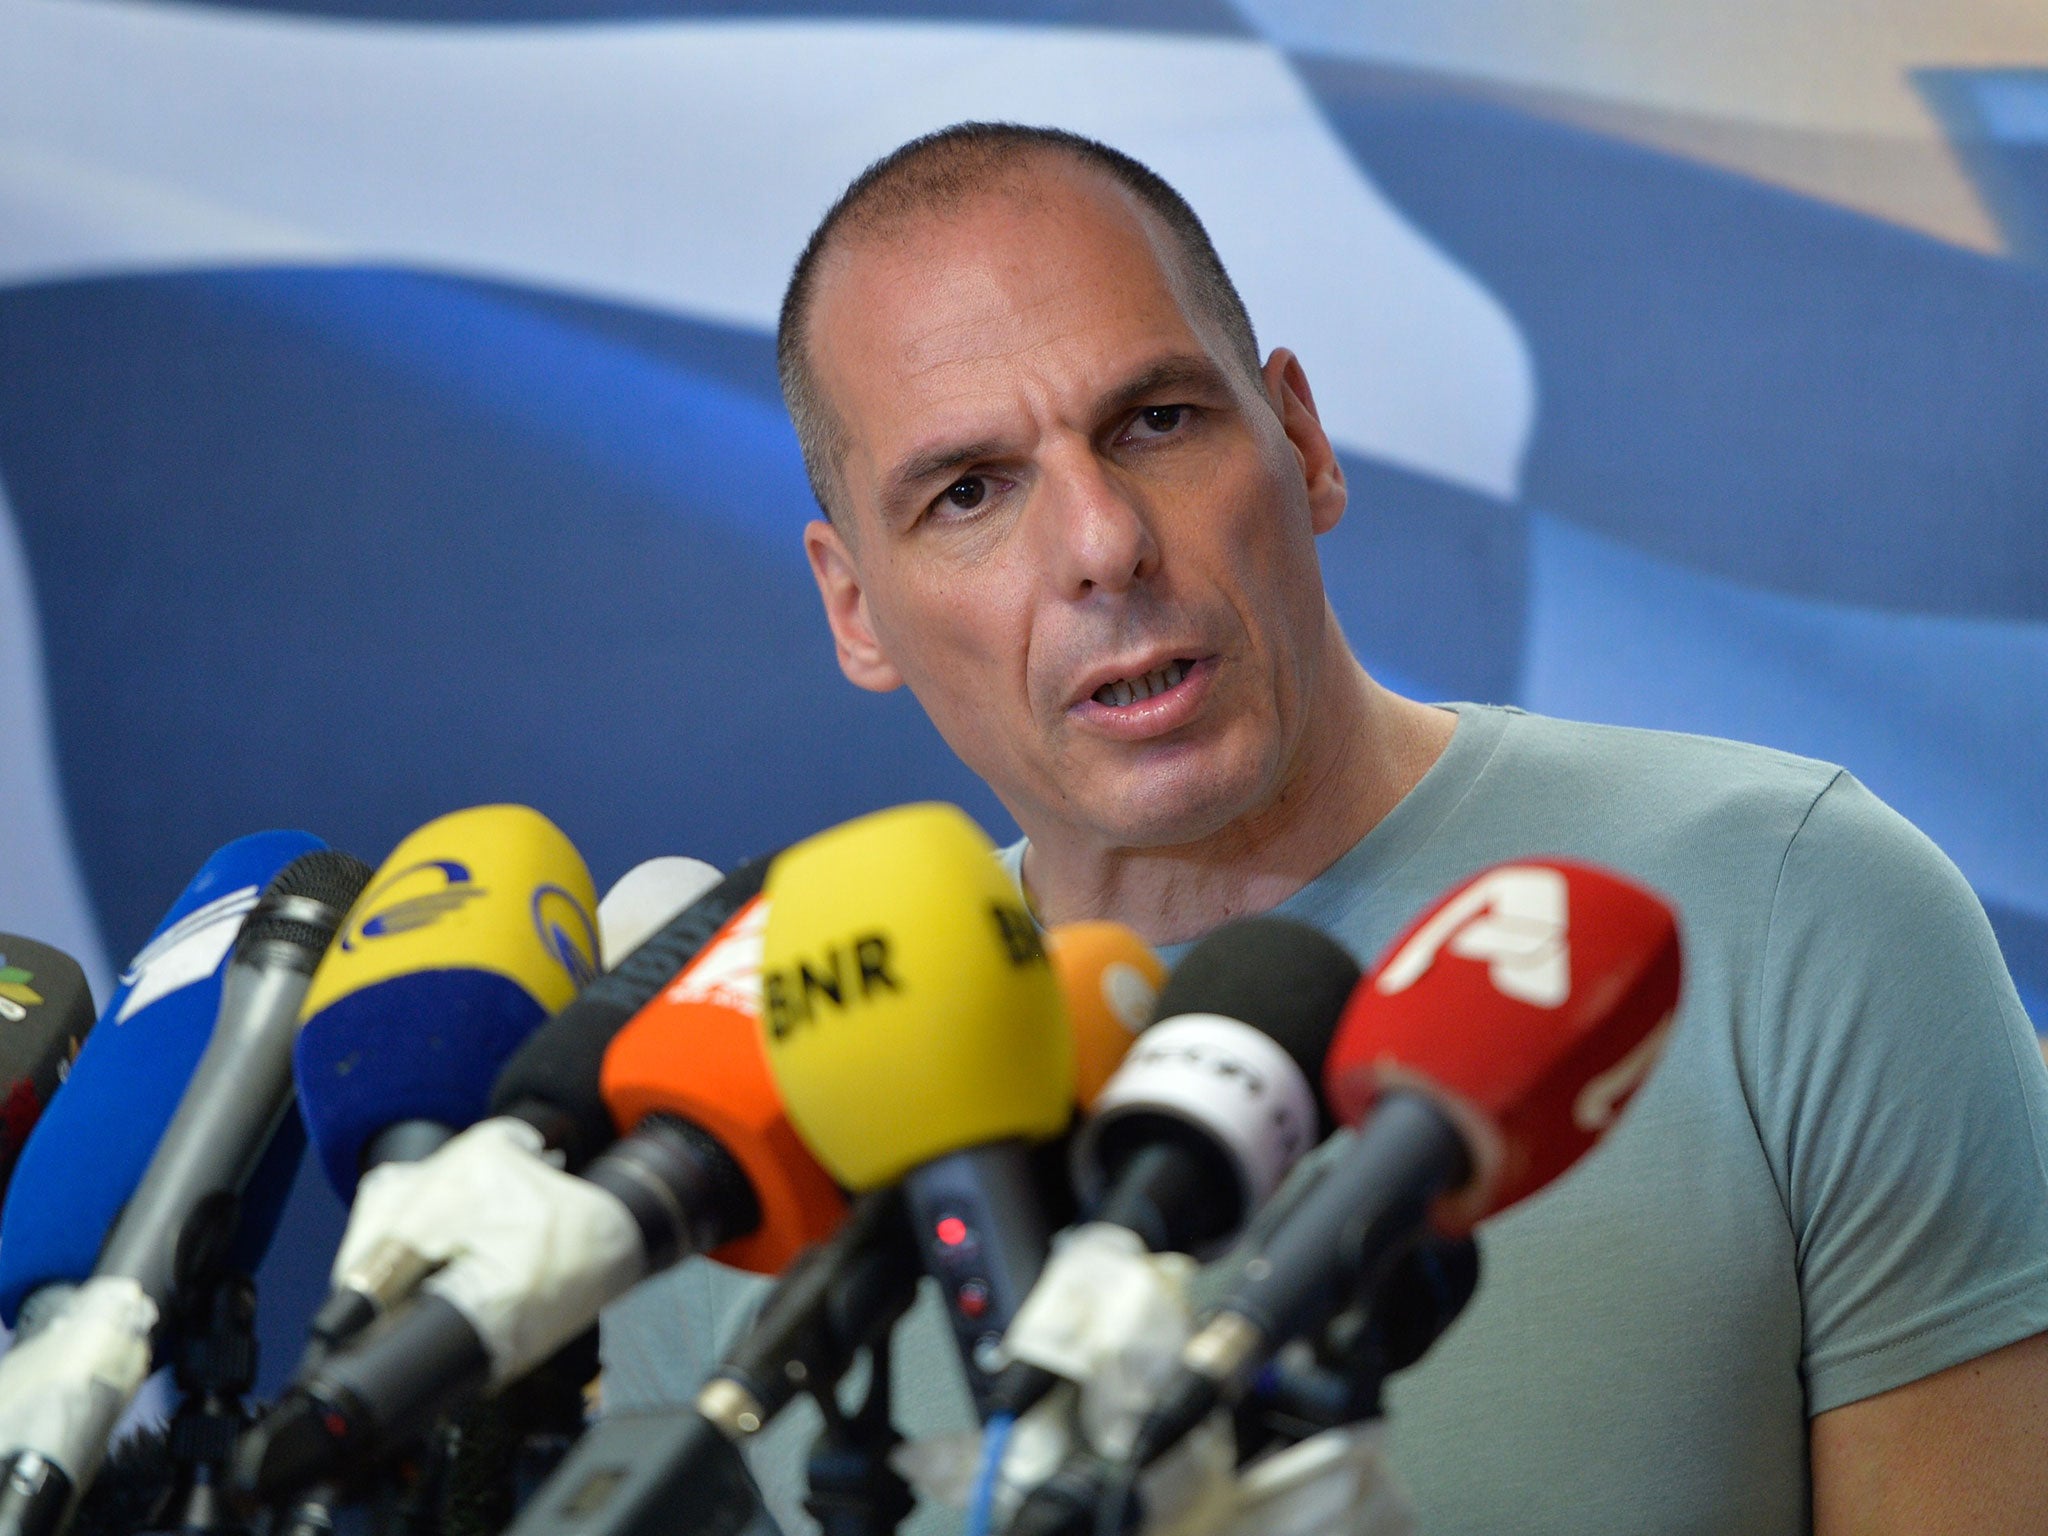 Yanis Varoufakis led Greece's negotiations with its creditors before he was replaced